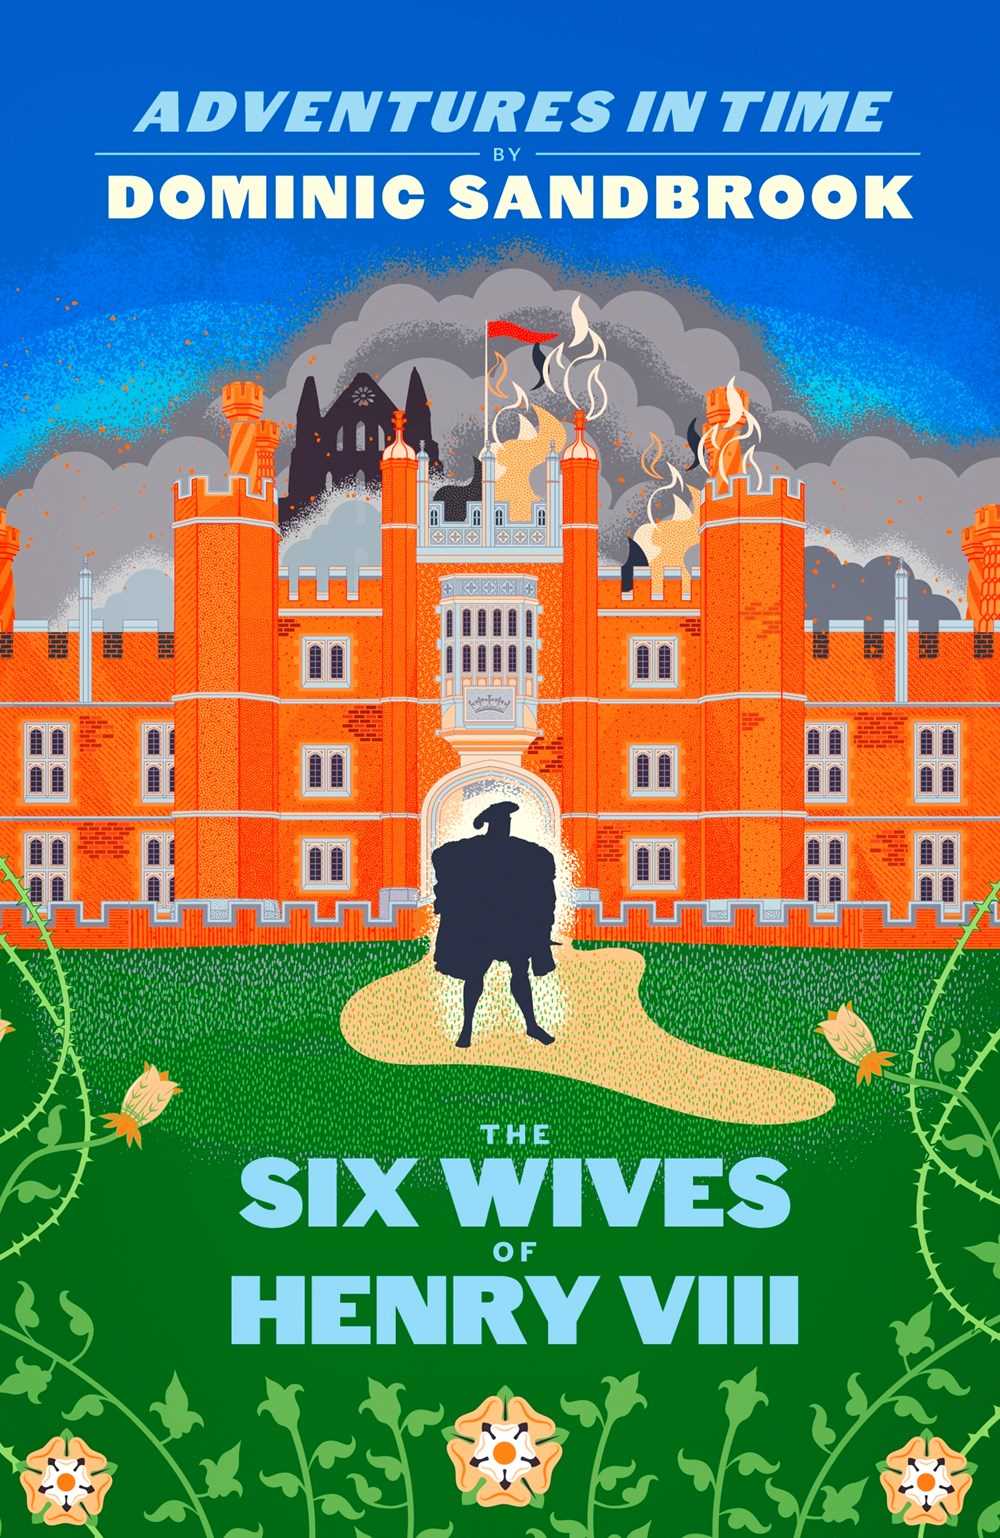 The Six Wives of Henry VIII (Adventures in Time)